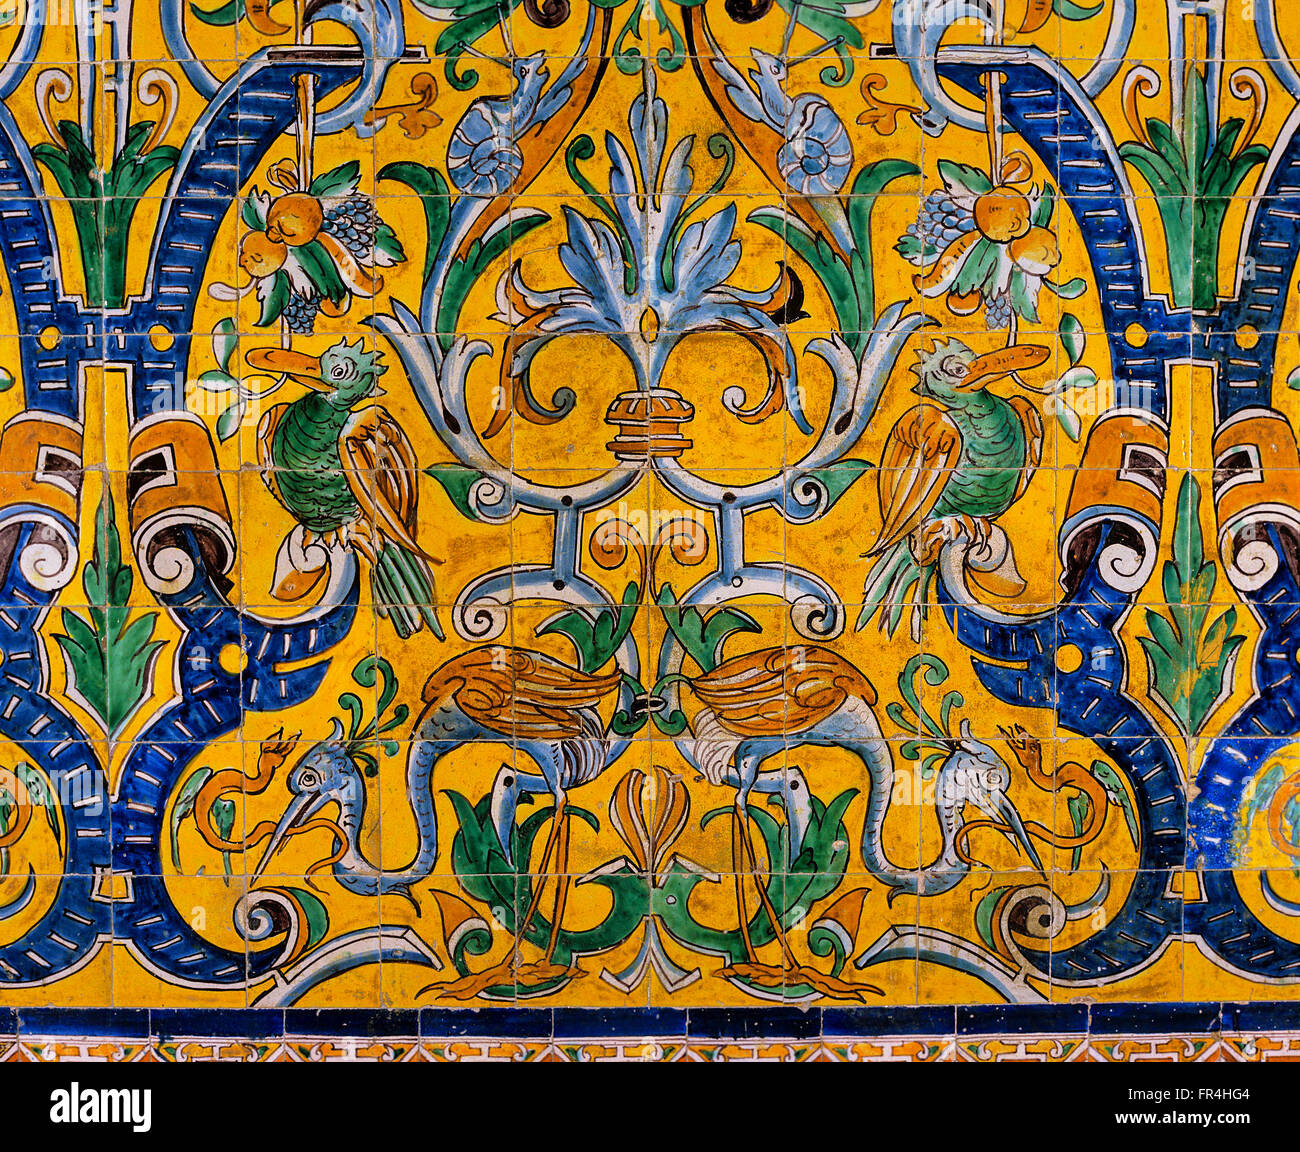 Glazed tiles 16th century, Gothic palace, Reales Alcazares, Seville, Region of Andalusia, Spain, Europe Stock Photo